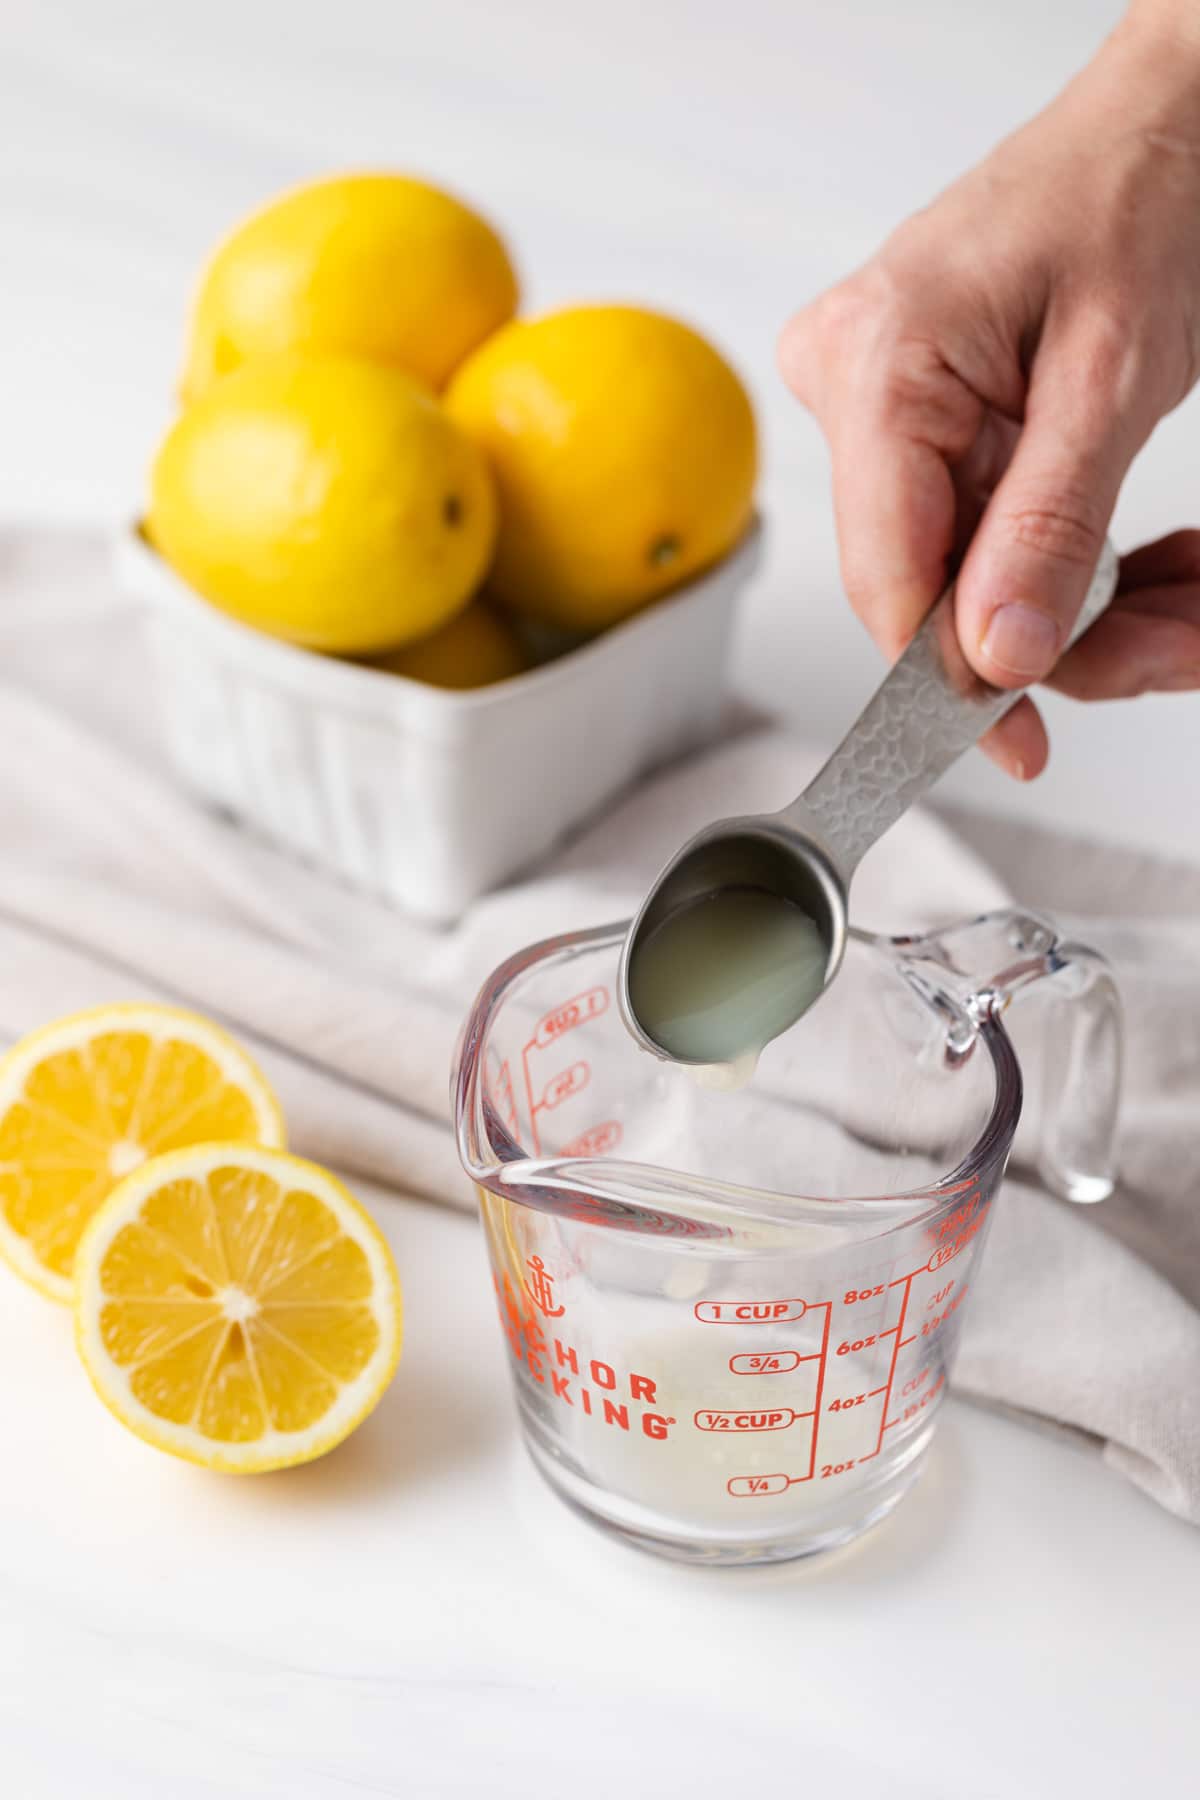 a tablespoon of lemon juice being poured into a glass measuring cup with lemons and napkin in background